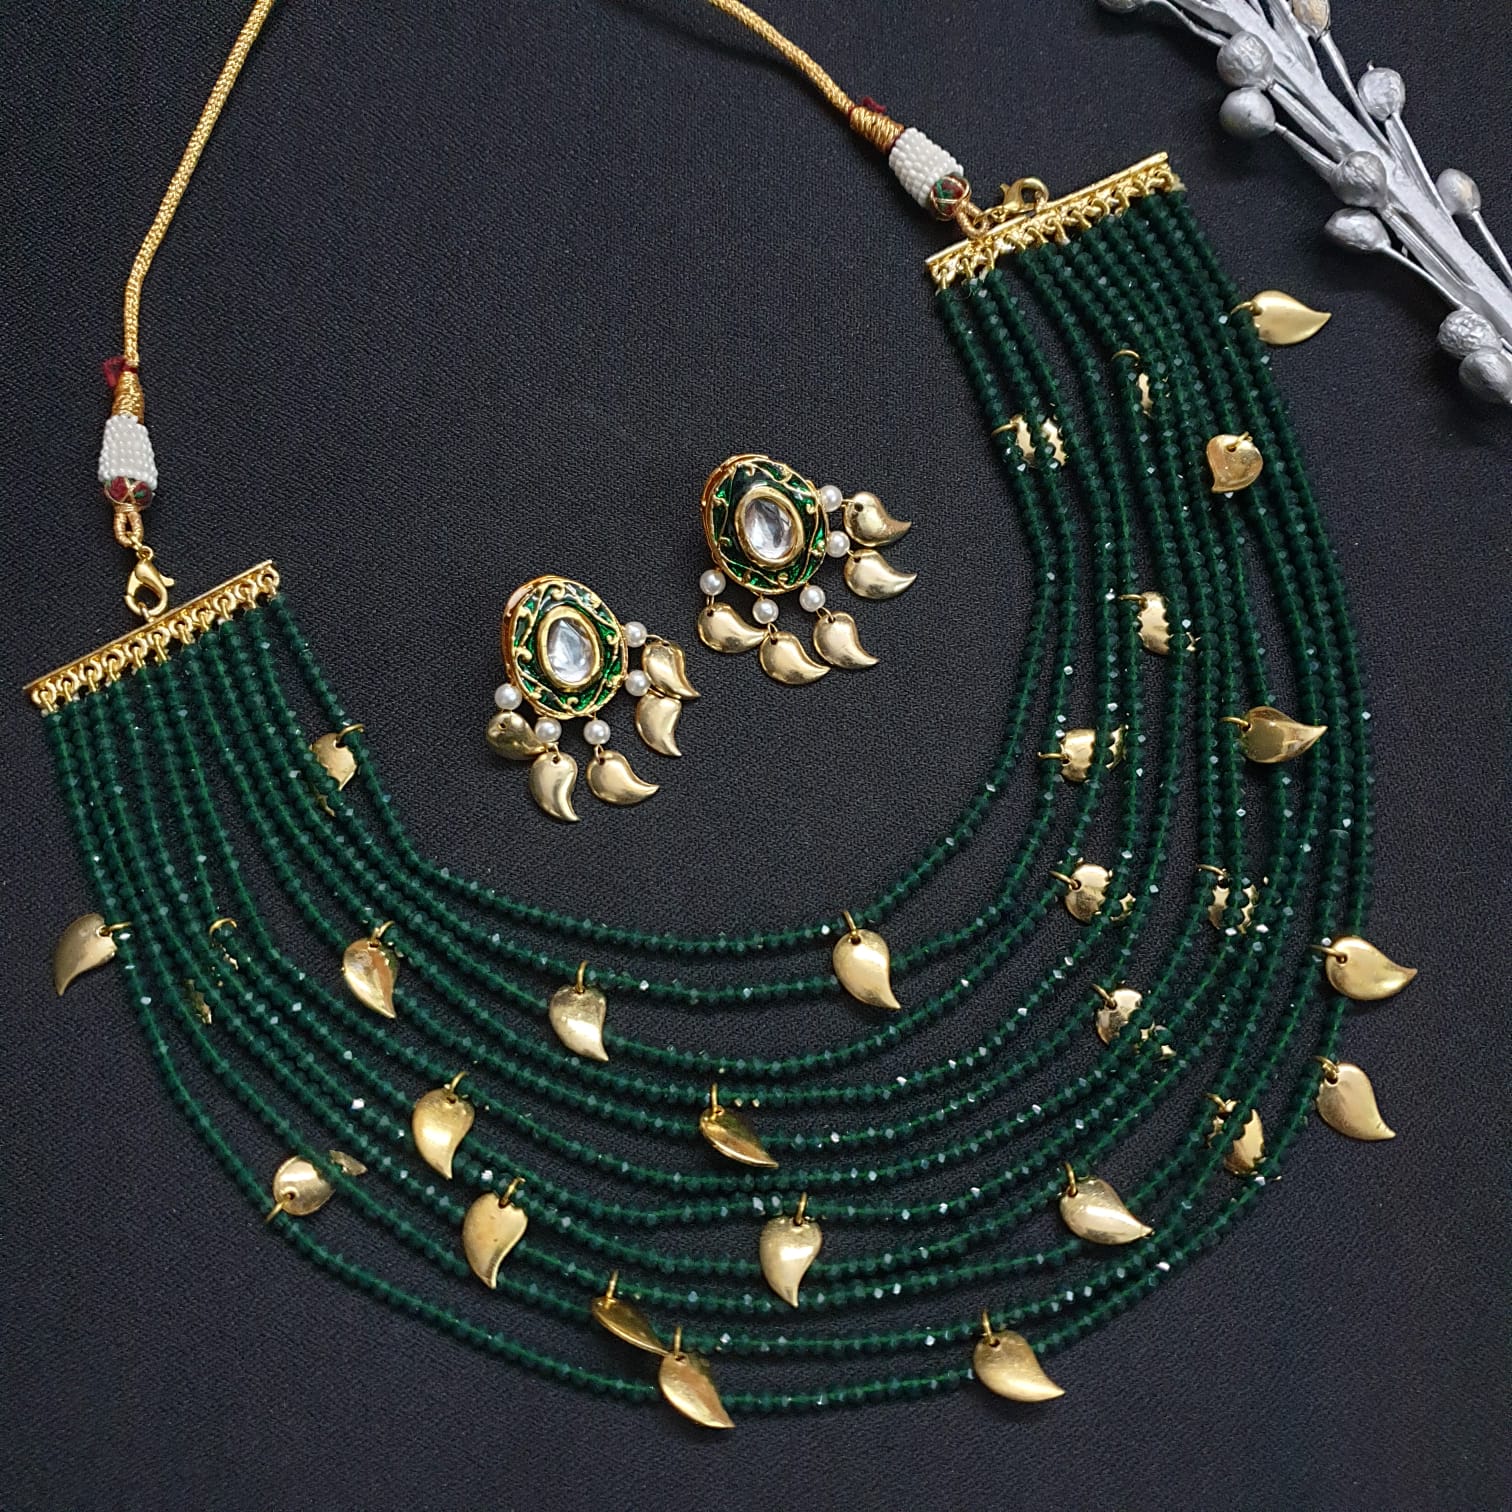 Green Beaded Golden Petals Necklace With Earrings